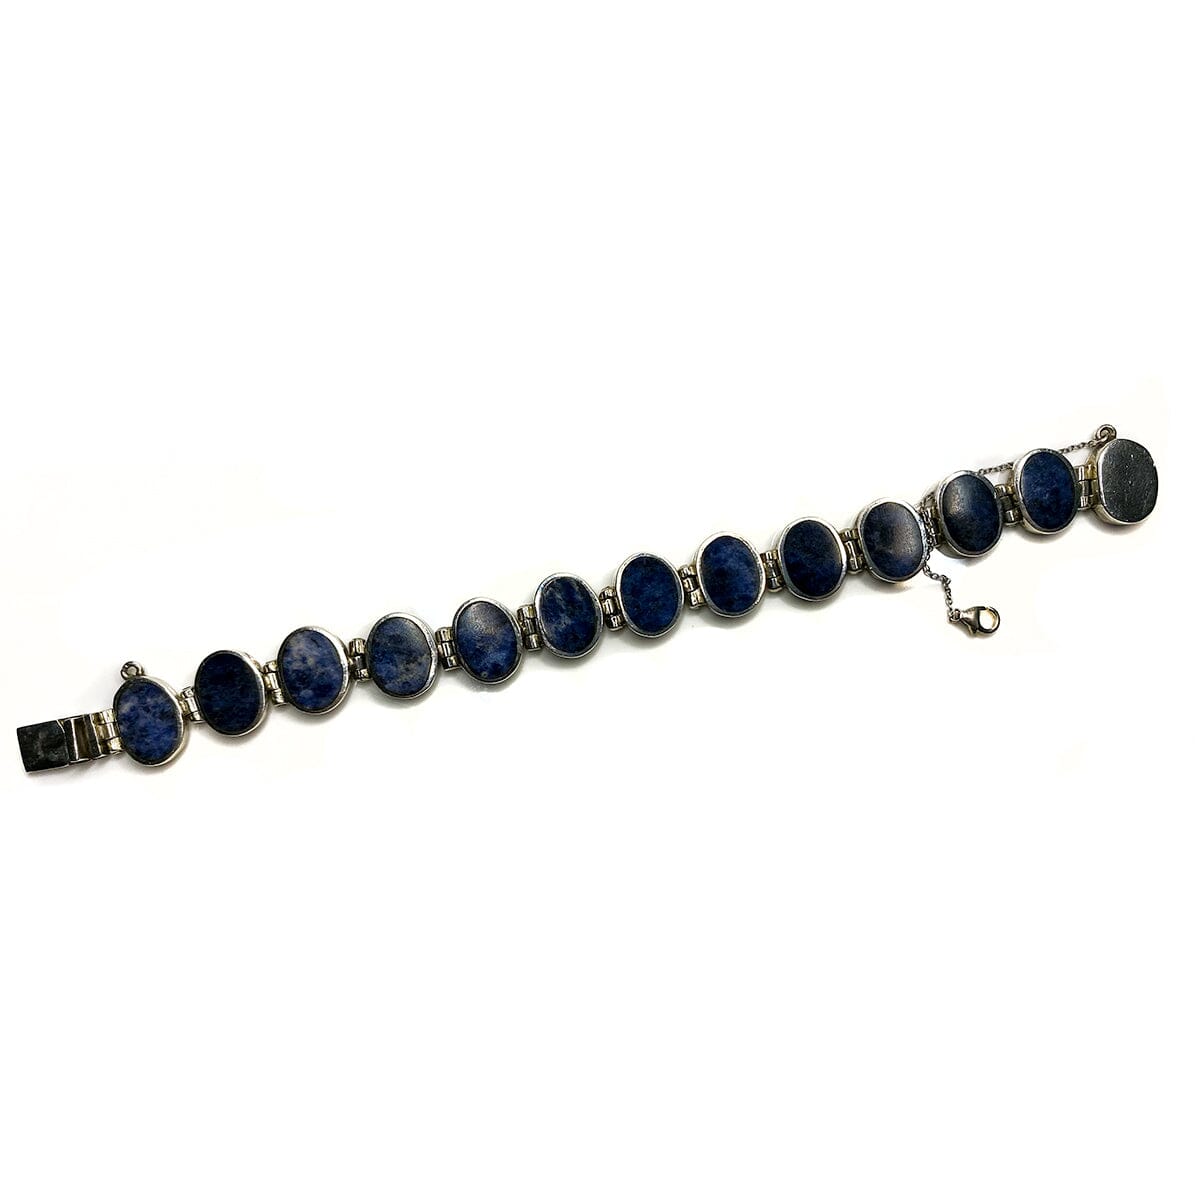 Great Lakes Boutique Silver and Sodalite Bracelet